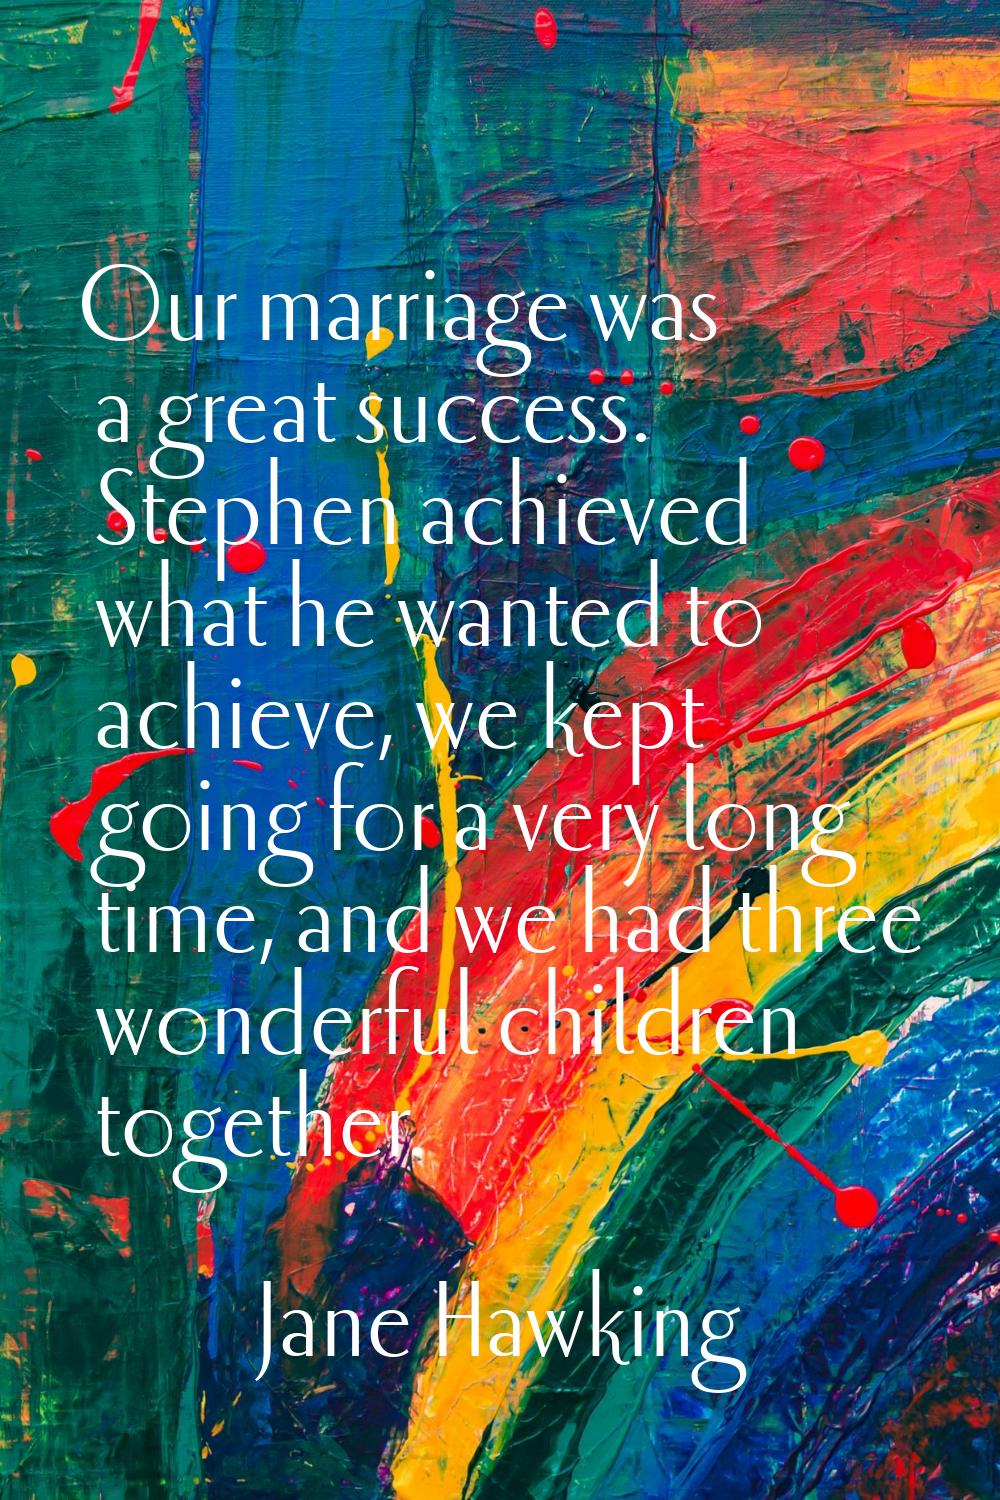 Our marriage was a great success. Stephen achieved what he wanted to achieve, we kept going for a v